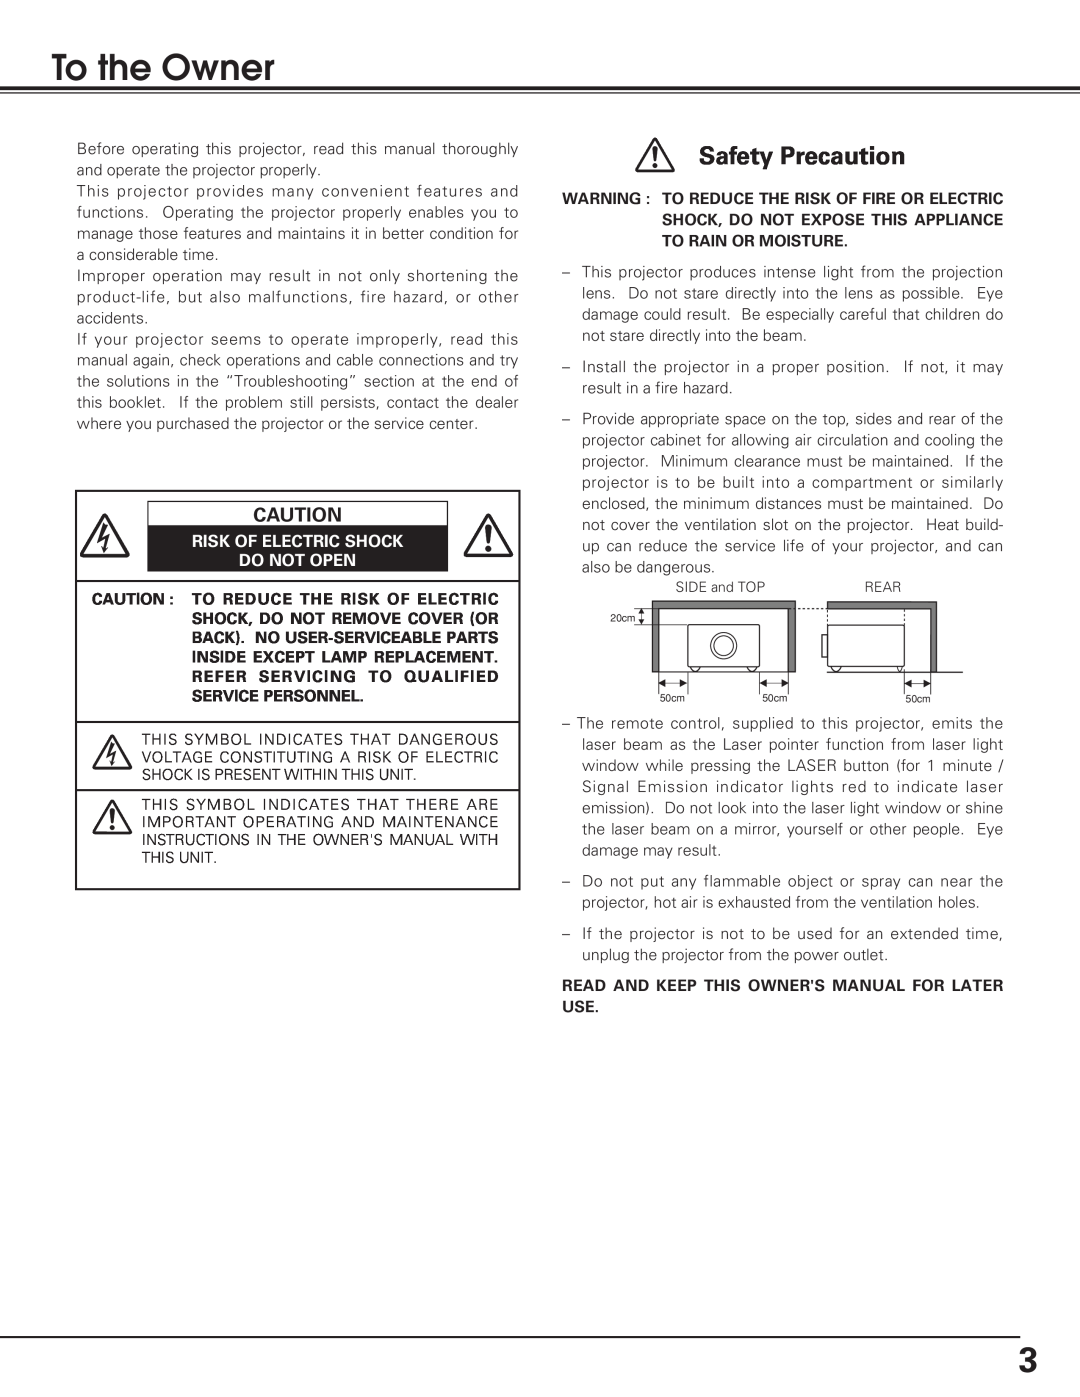 Eiki LC-SB20, LC-XB25, LC-XB20 owner manual To the Owner, Safety Precaution, Risk Of Electric Shock Do Not Open 